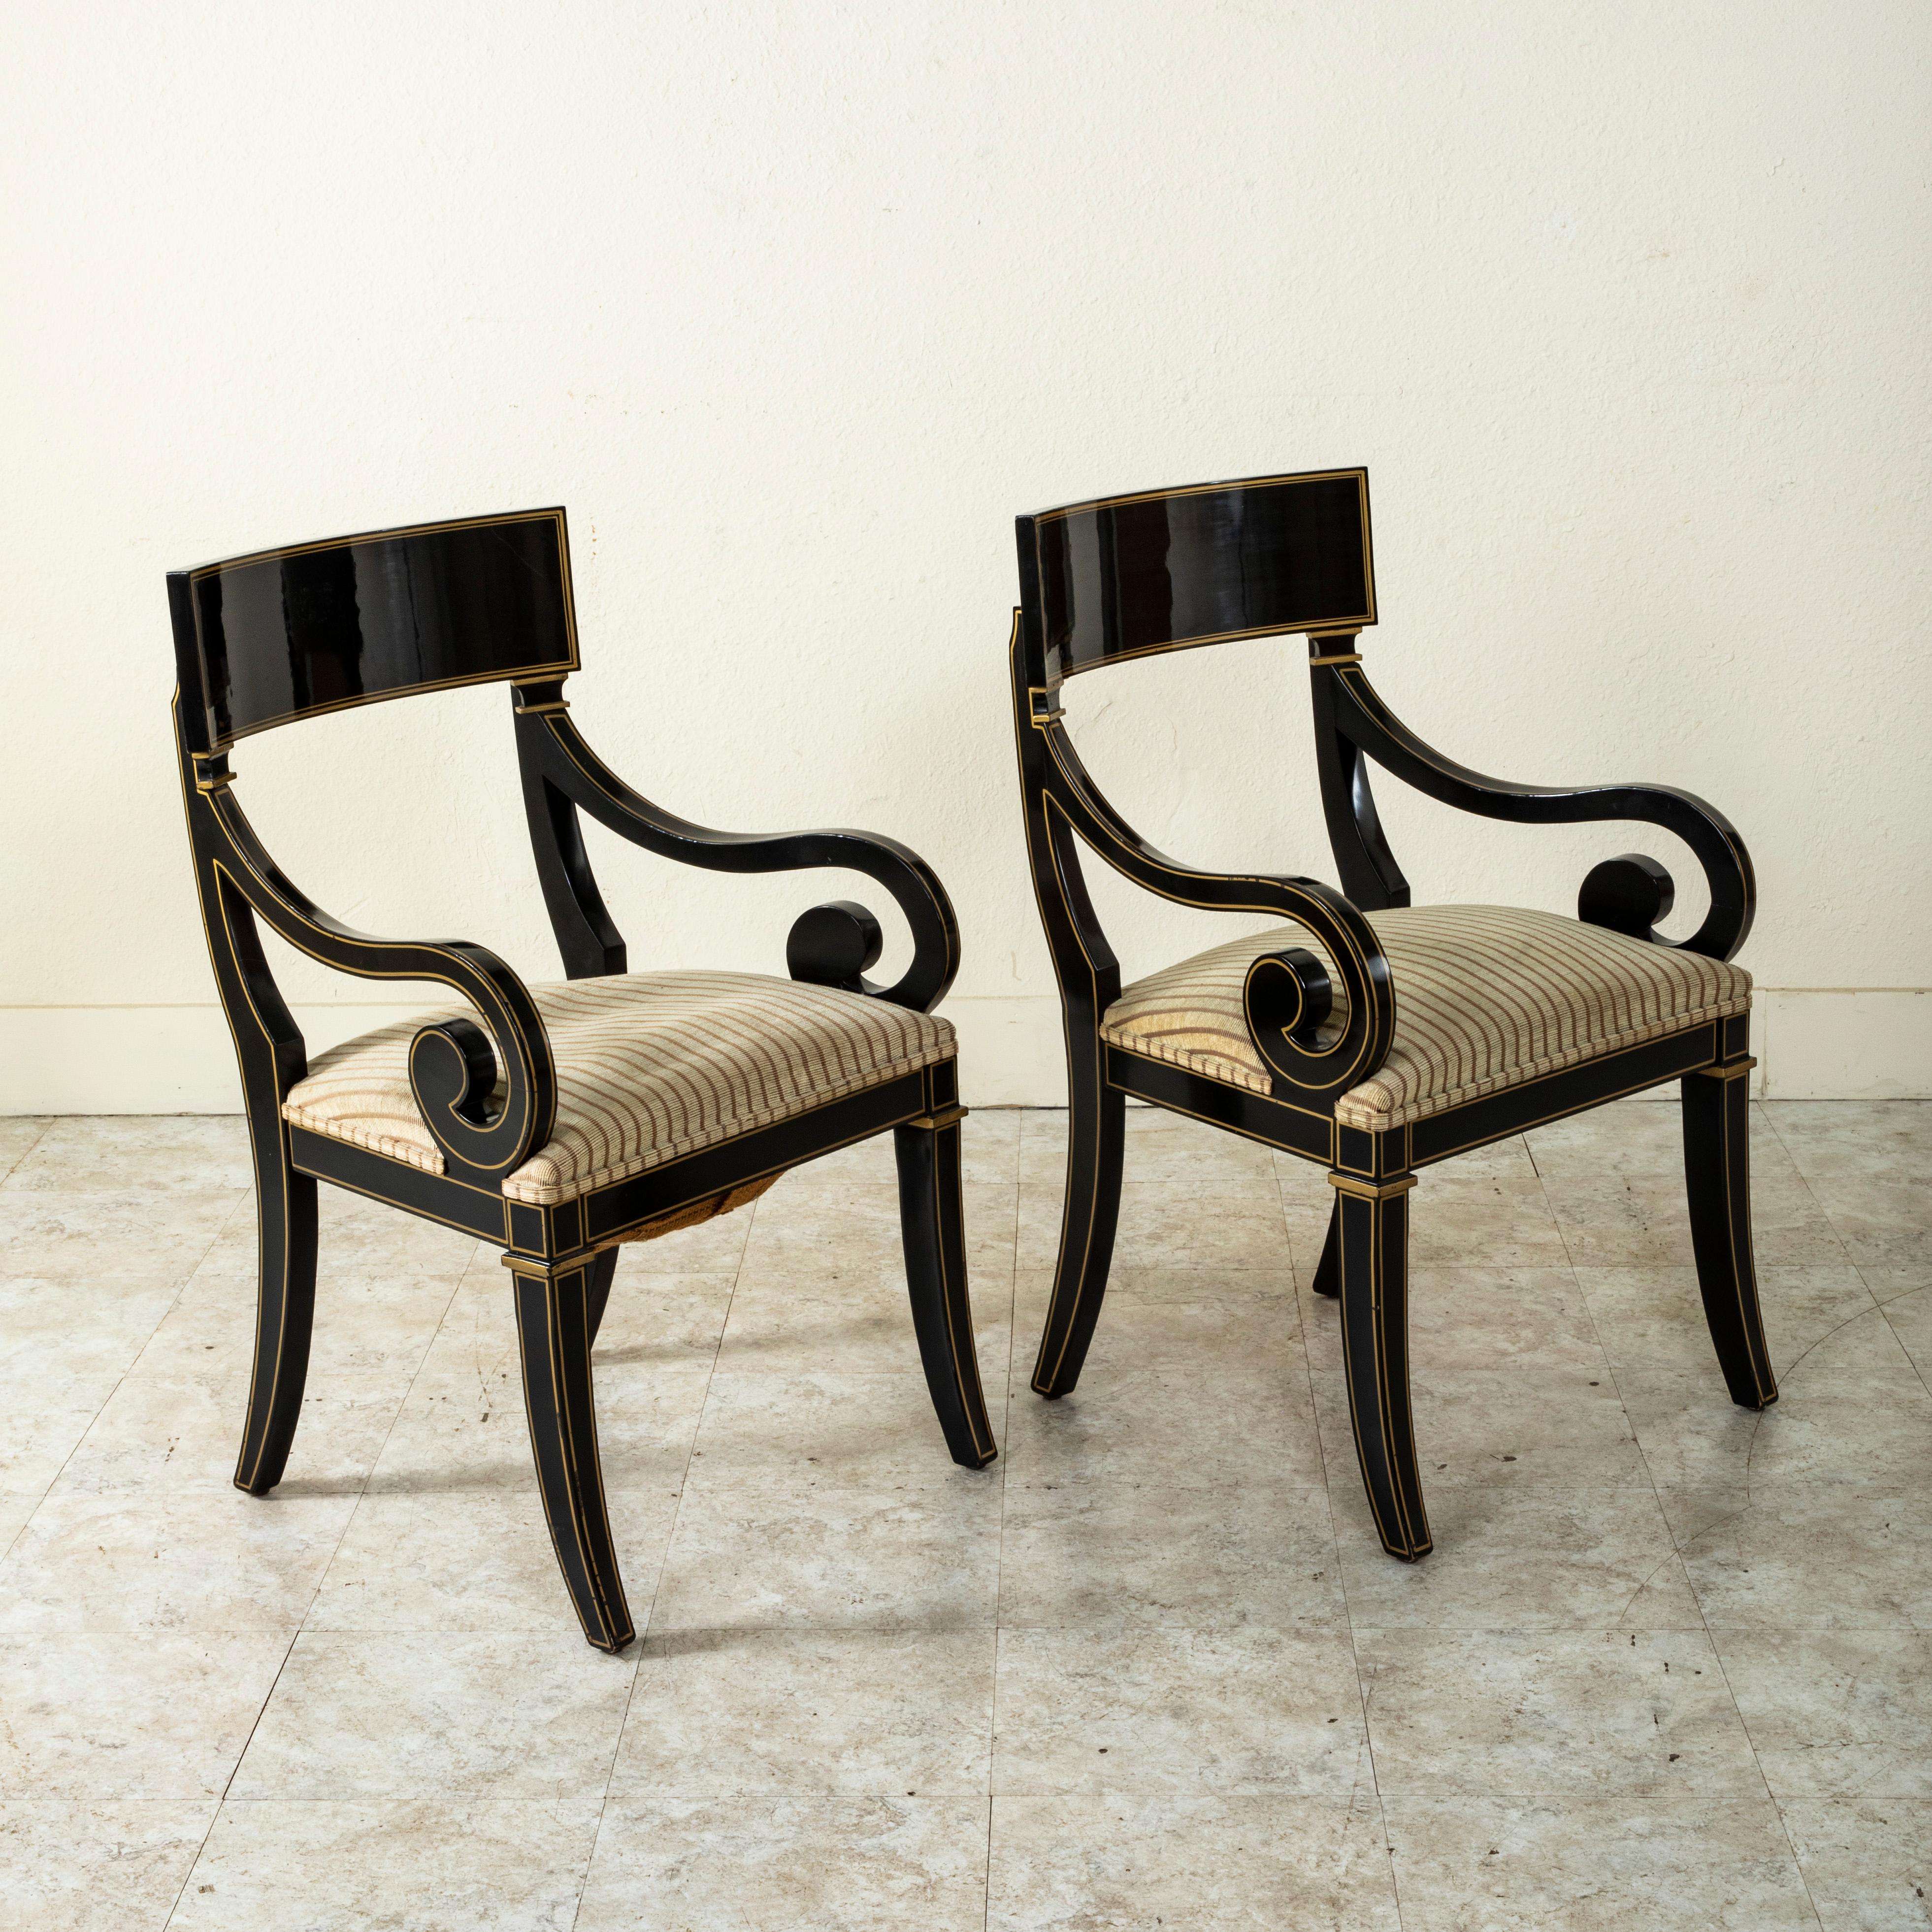 This pair of mid-twentieth century French Restauration style armchairs features a black lacquered finish with gold detailing. The pair is detailed with square capitals below the seat backs, scrolling armrests and legs that gently curve outward 